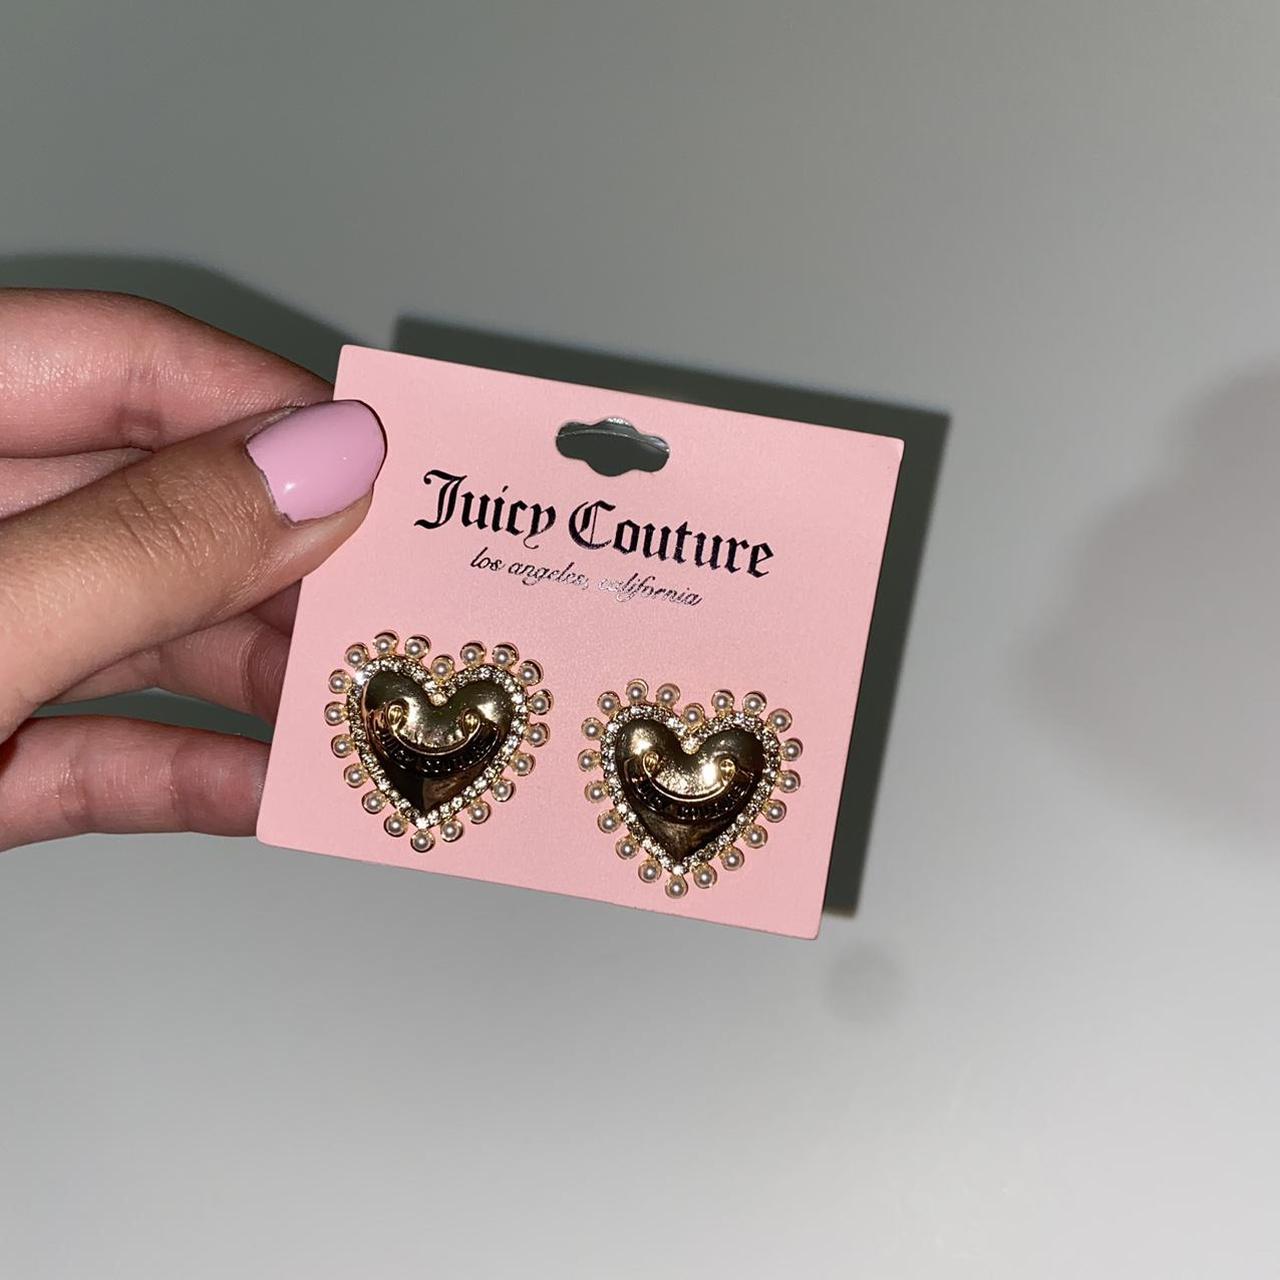 New with tag. Juicy Couture Gold Tone Heart , Love, - Depop